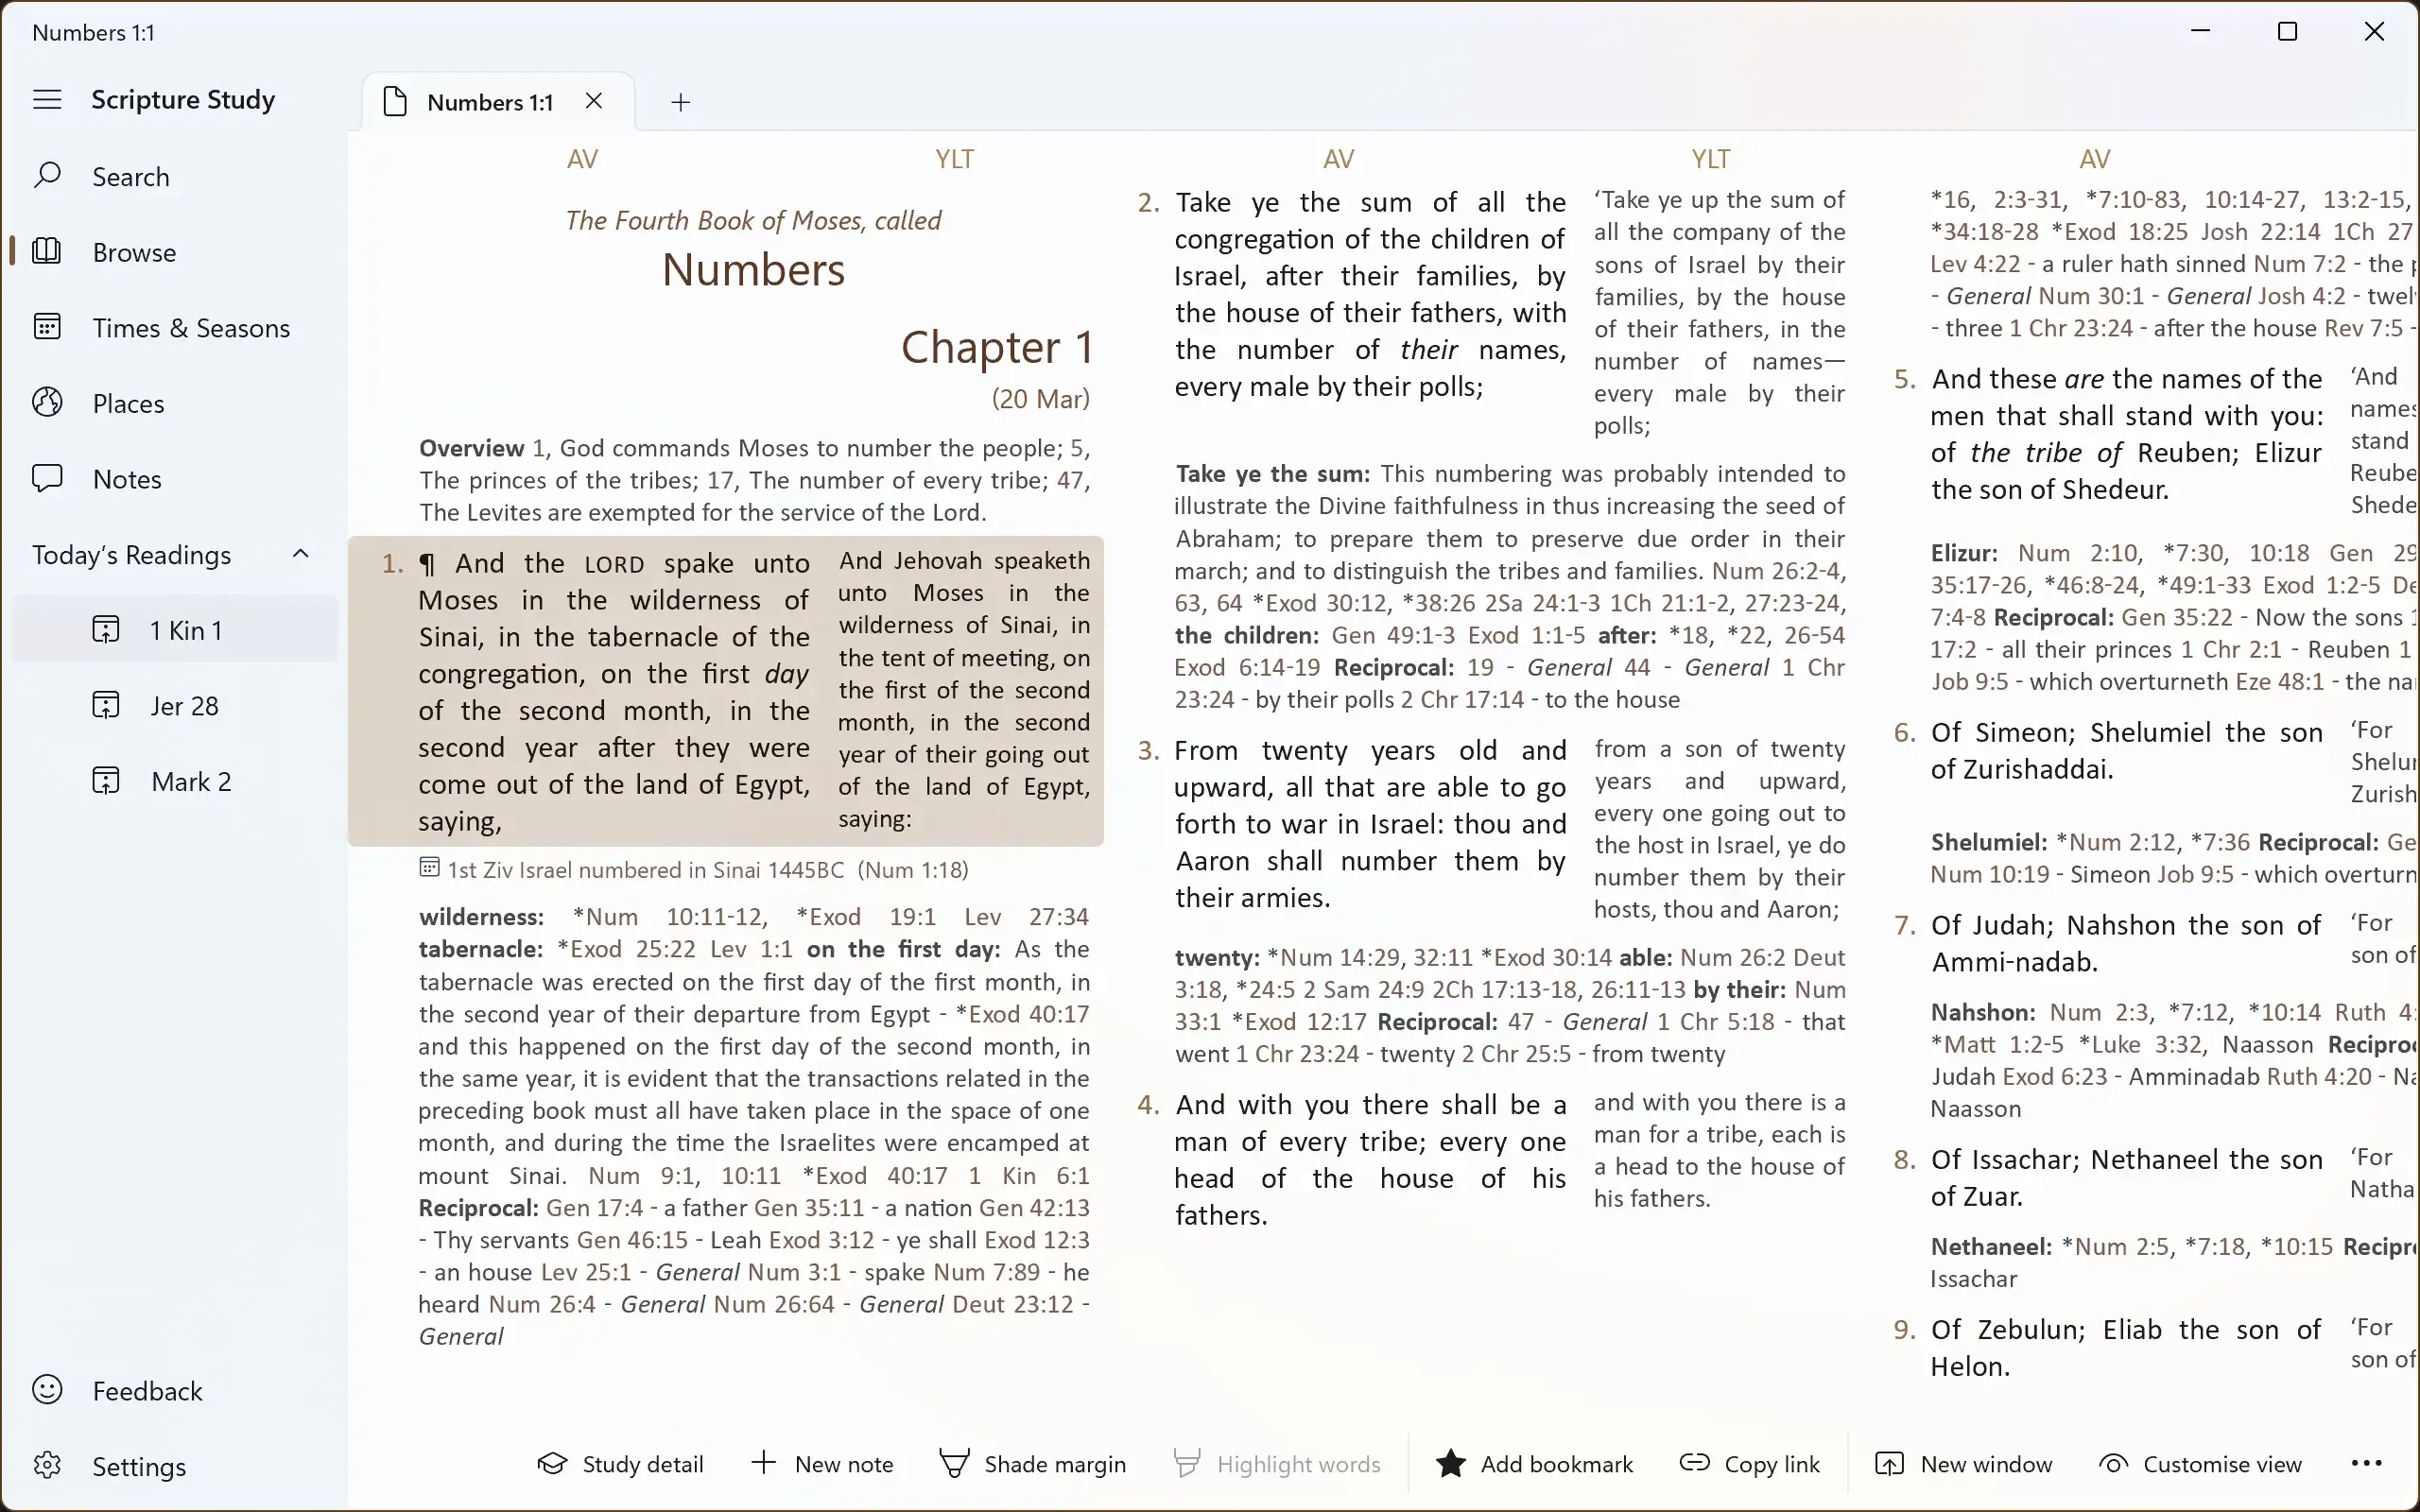 Screenshot showing multiple versions and Treasury of Scripture Knowledge notes